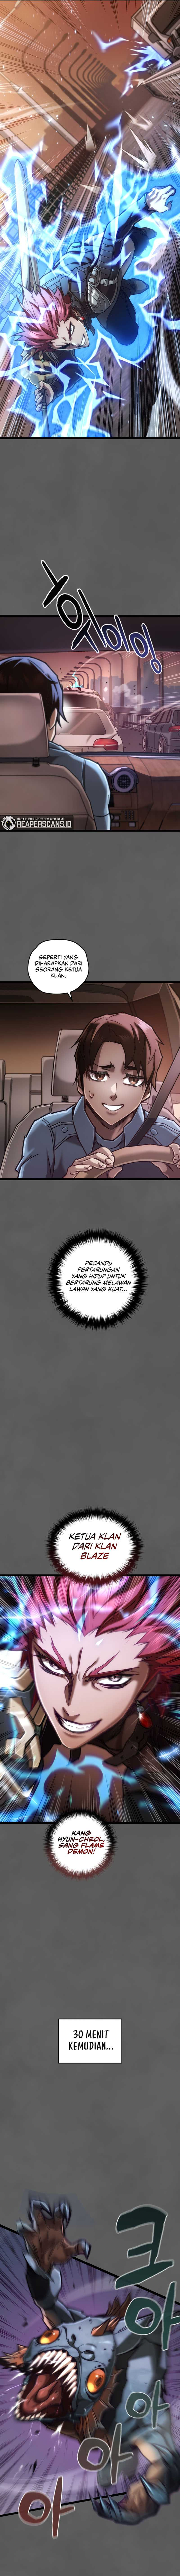 Re:life Player Chapter 09 - 105